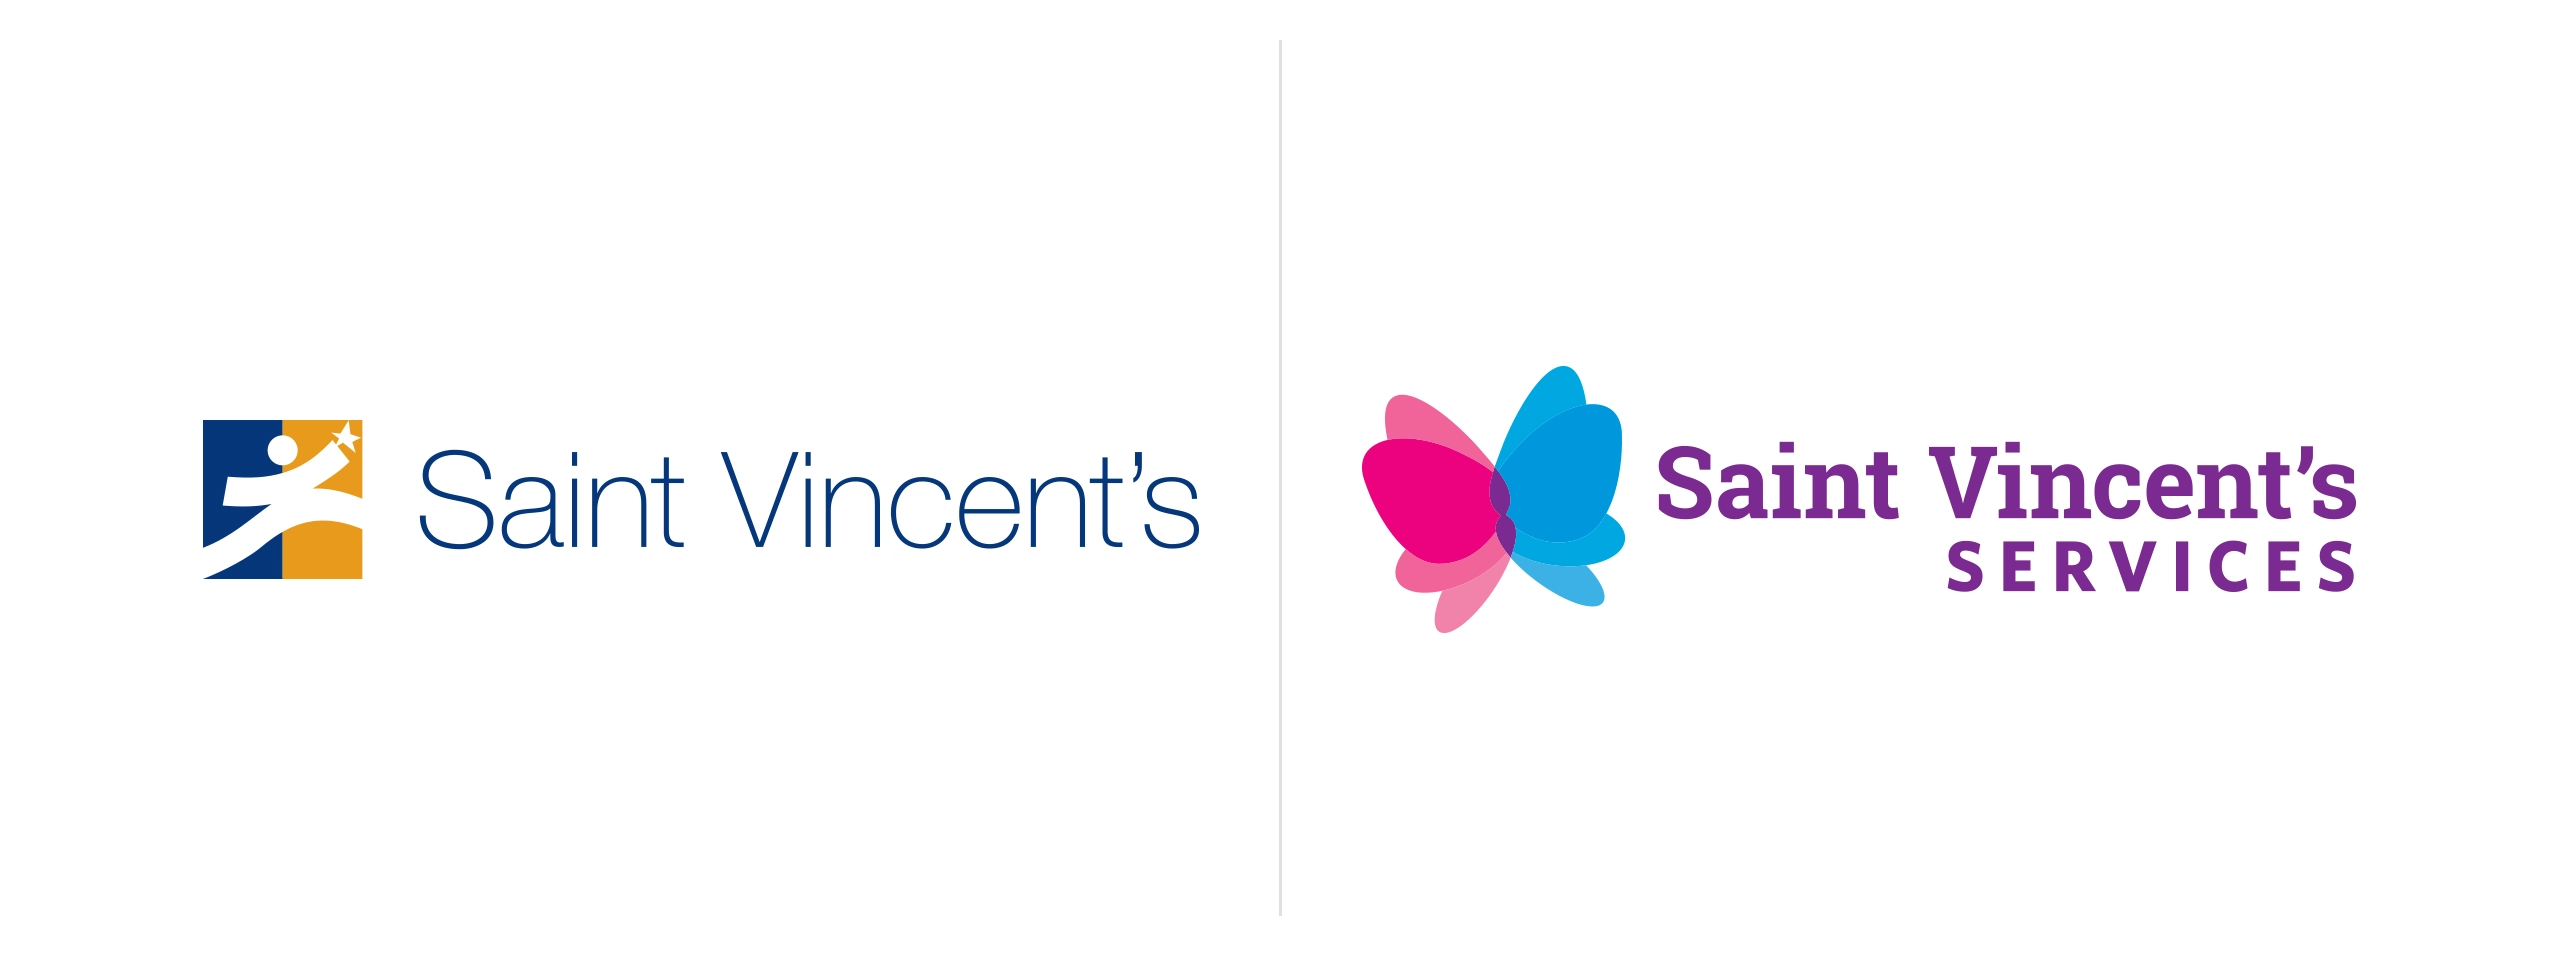 Saint Vincent's Services Old and new logos side by side